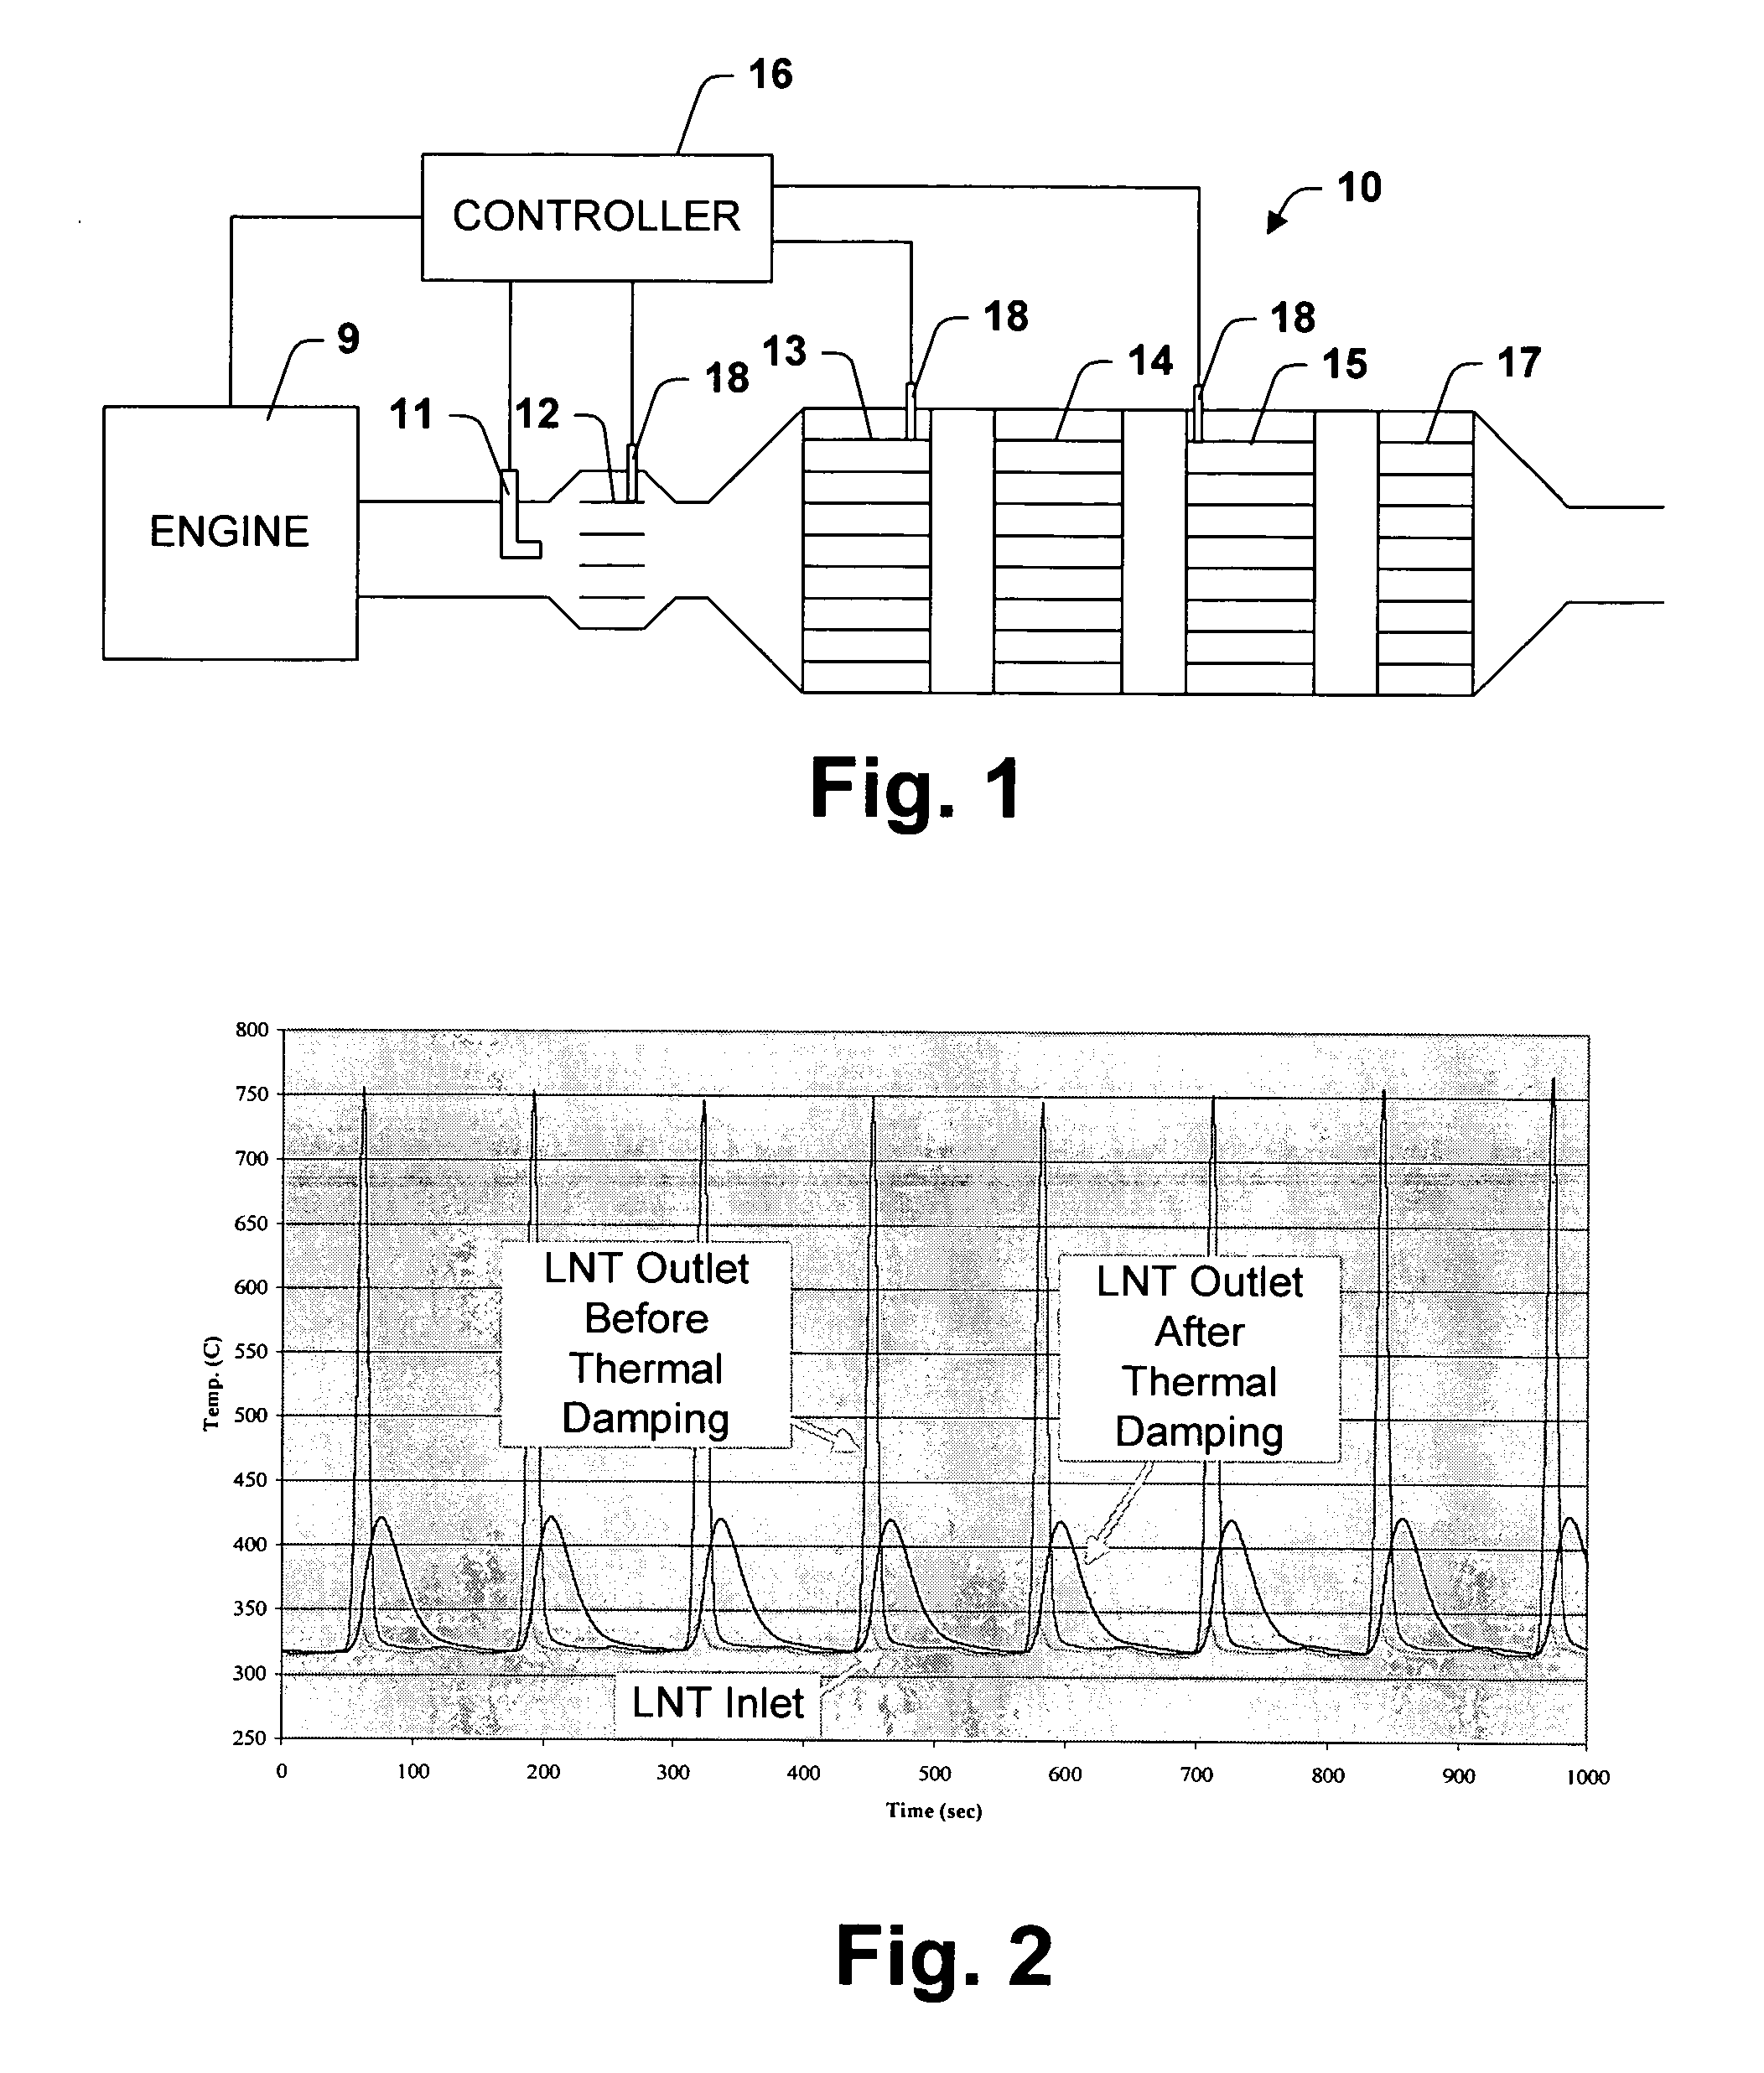 Thermal management of hybrid LNT/SCR aftertreatment during desulfation